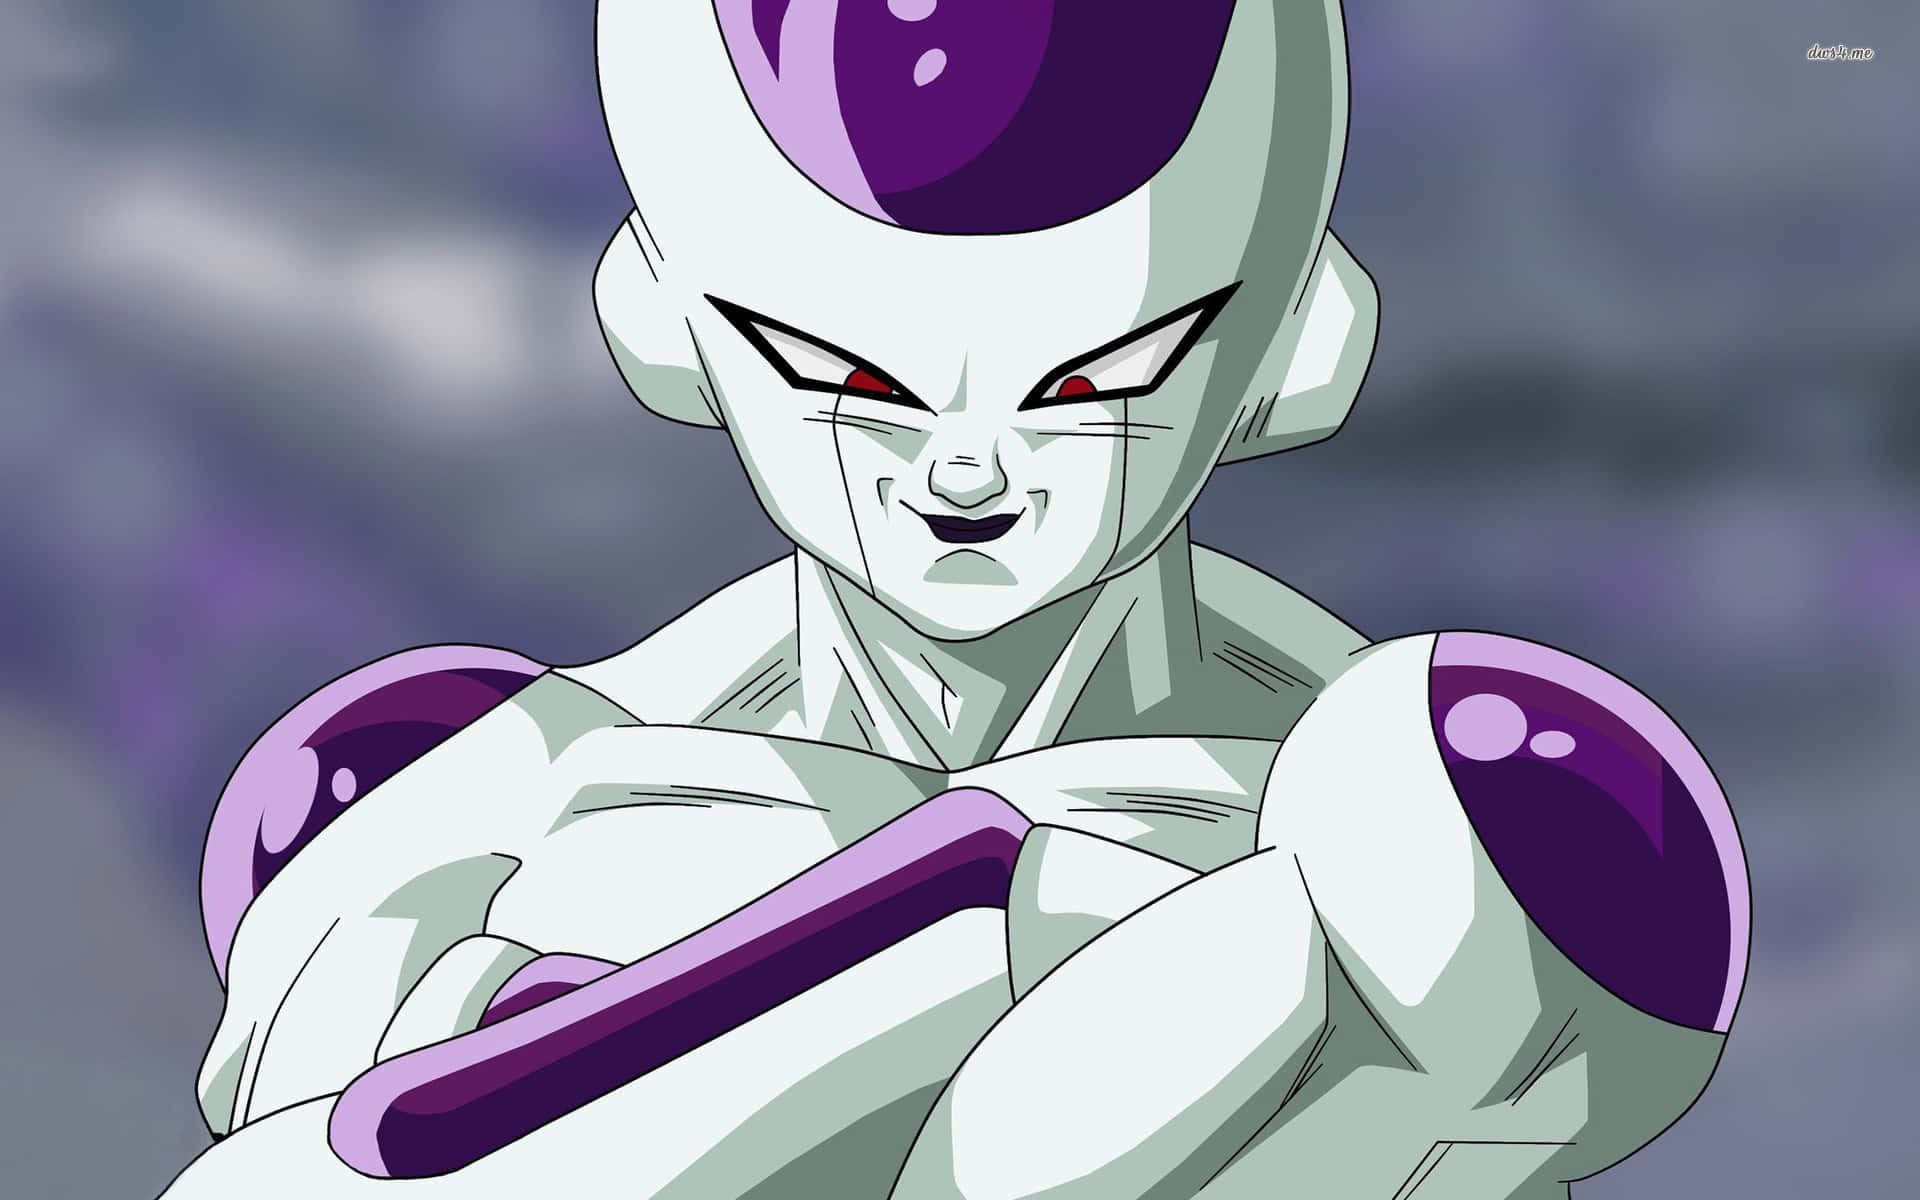 Frieza Arms Crossed Close Up Wallpaper